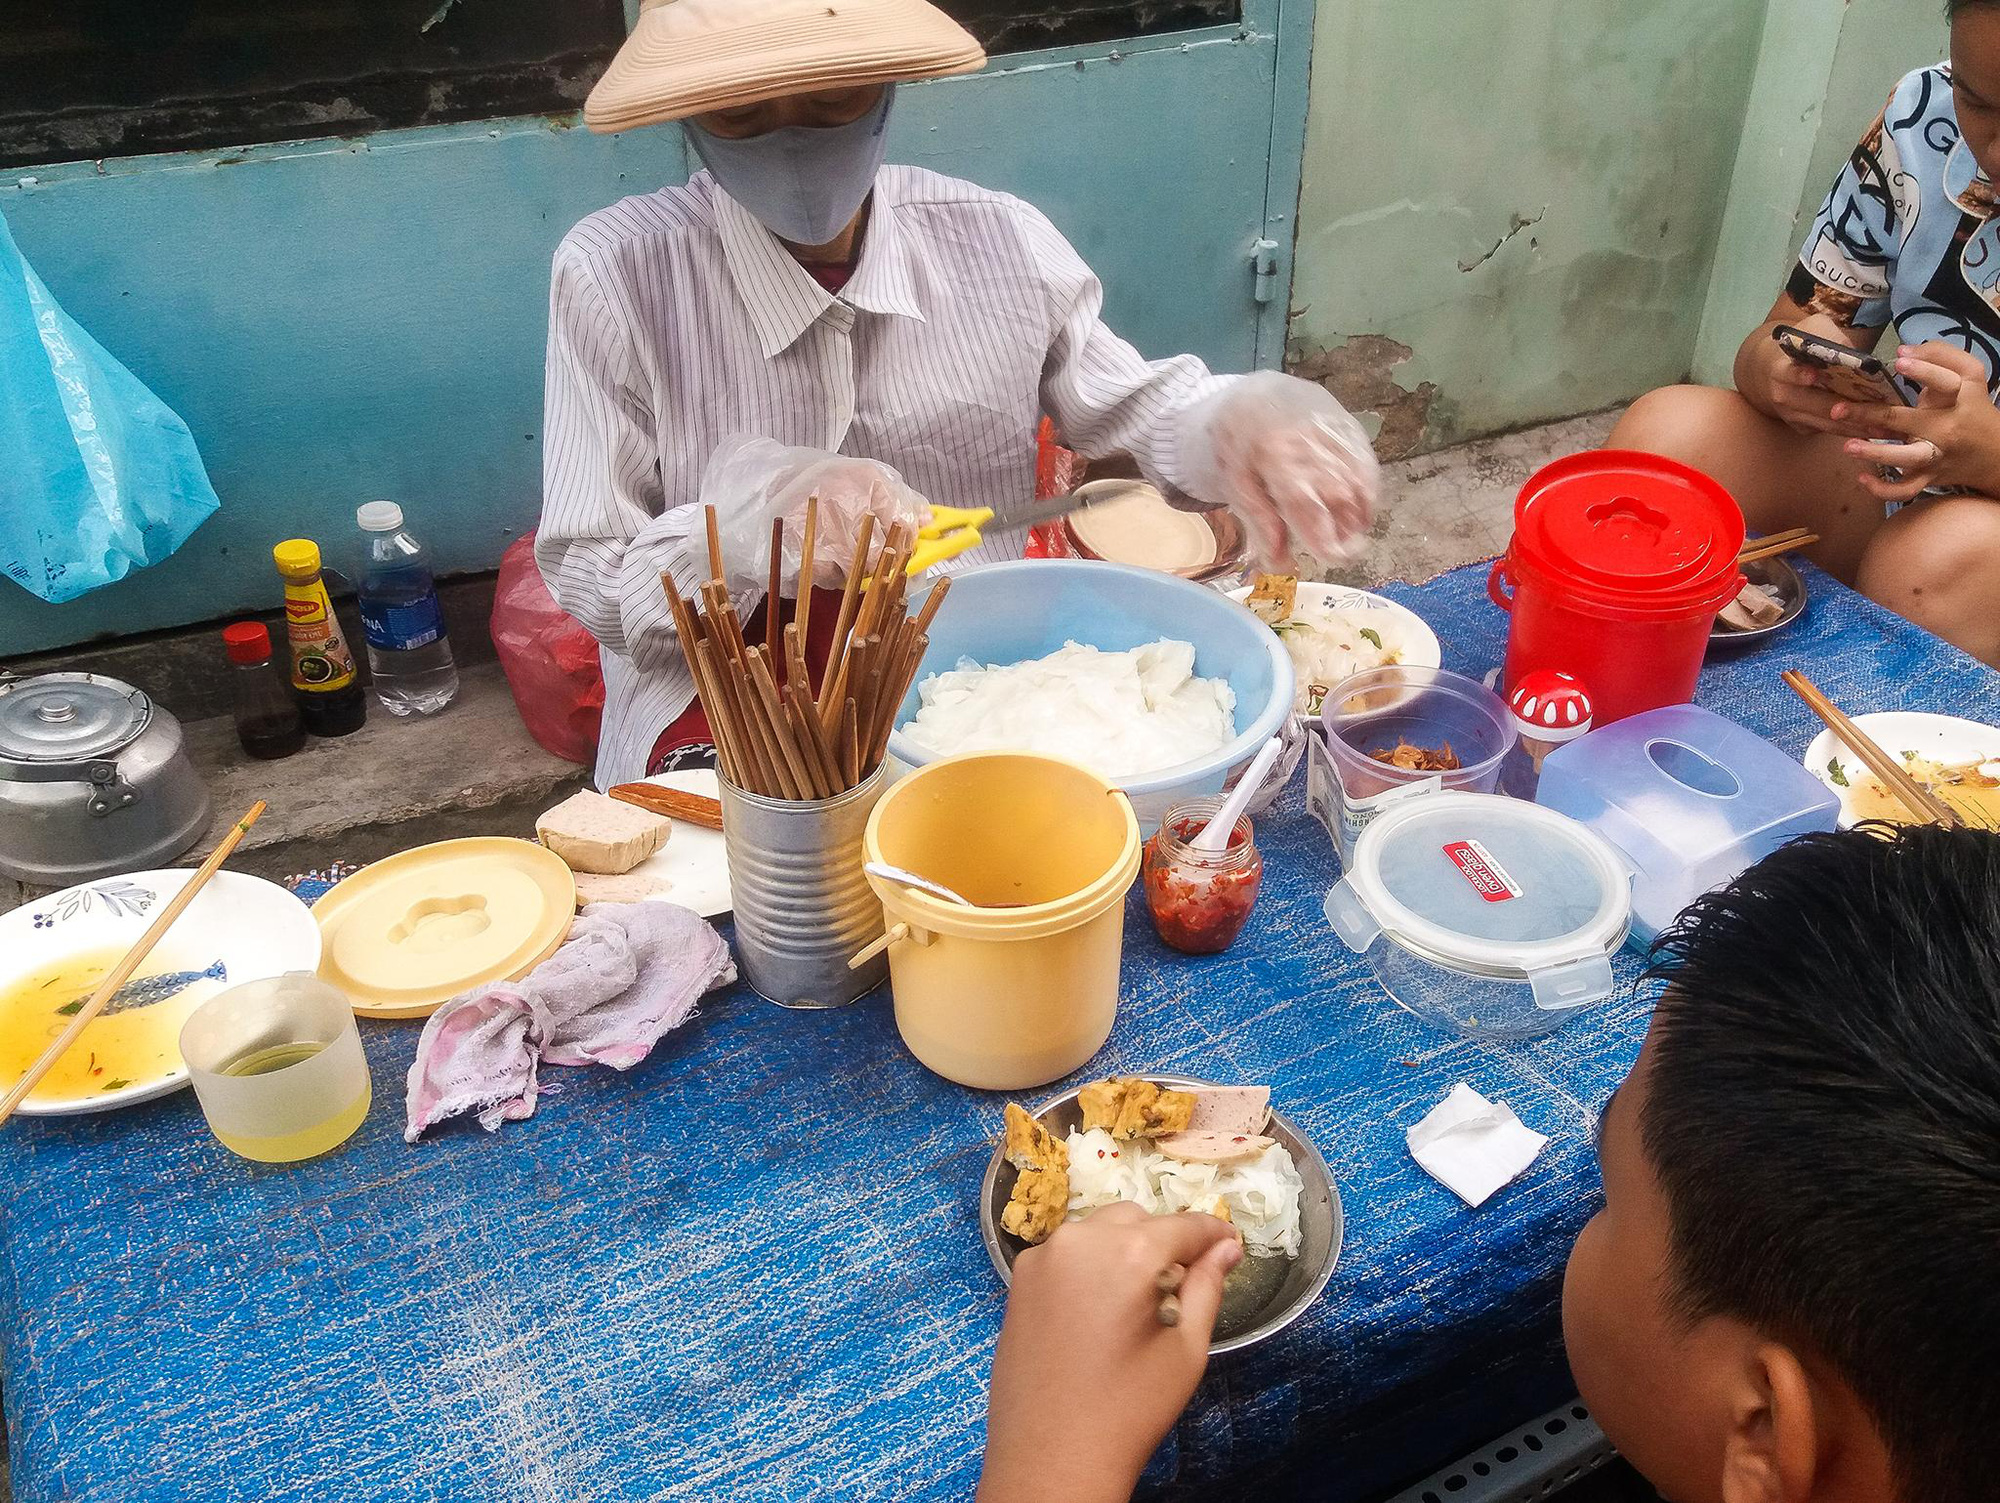 Lan prepares 'banh uot' for a customer on Nghia Phat Street, Tan Binh District, Ho Chi Minh City. Photo: Minh Duc / Tuoi Tre